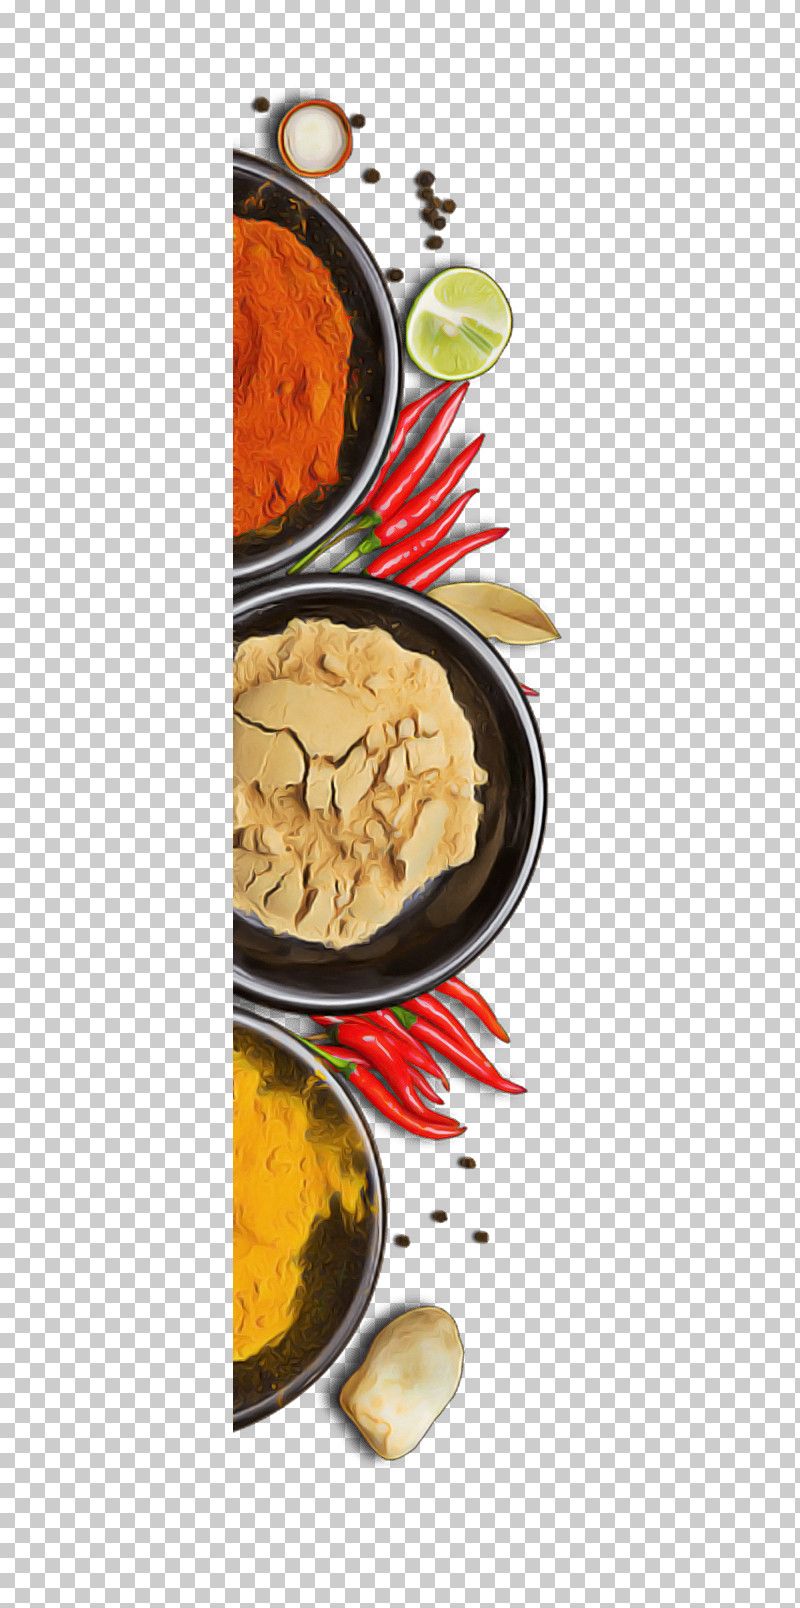 Indian Cuisine Vegetarian Cuisine Cookware And Bakeware Condiment Cuisine PNG, Clipart, Condiment, Cookware And Bakeware, Cuisine, Dish, Dish Network Free PNG Download